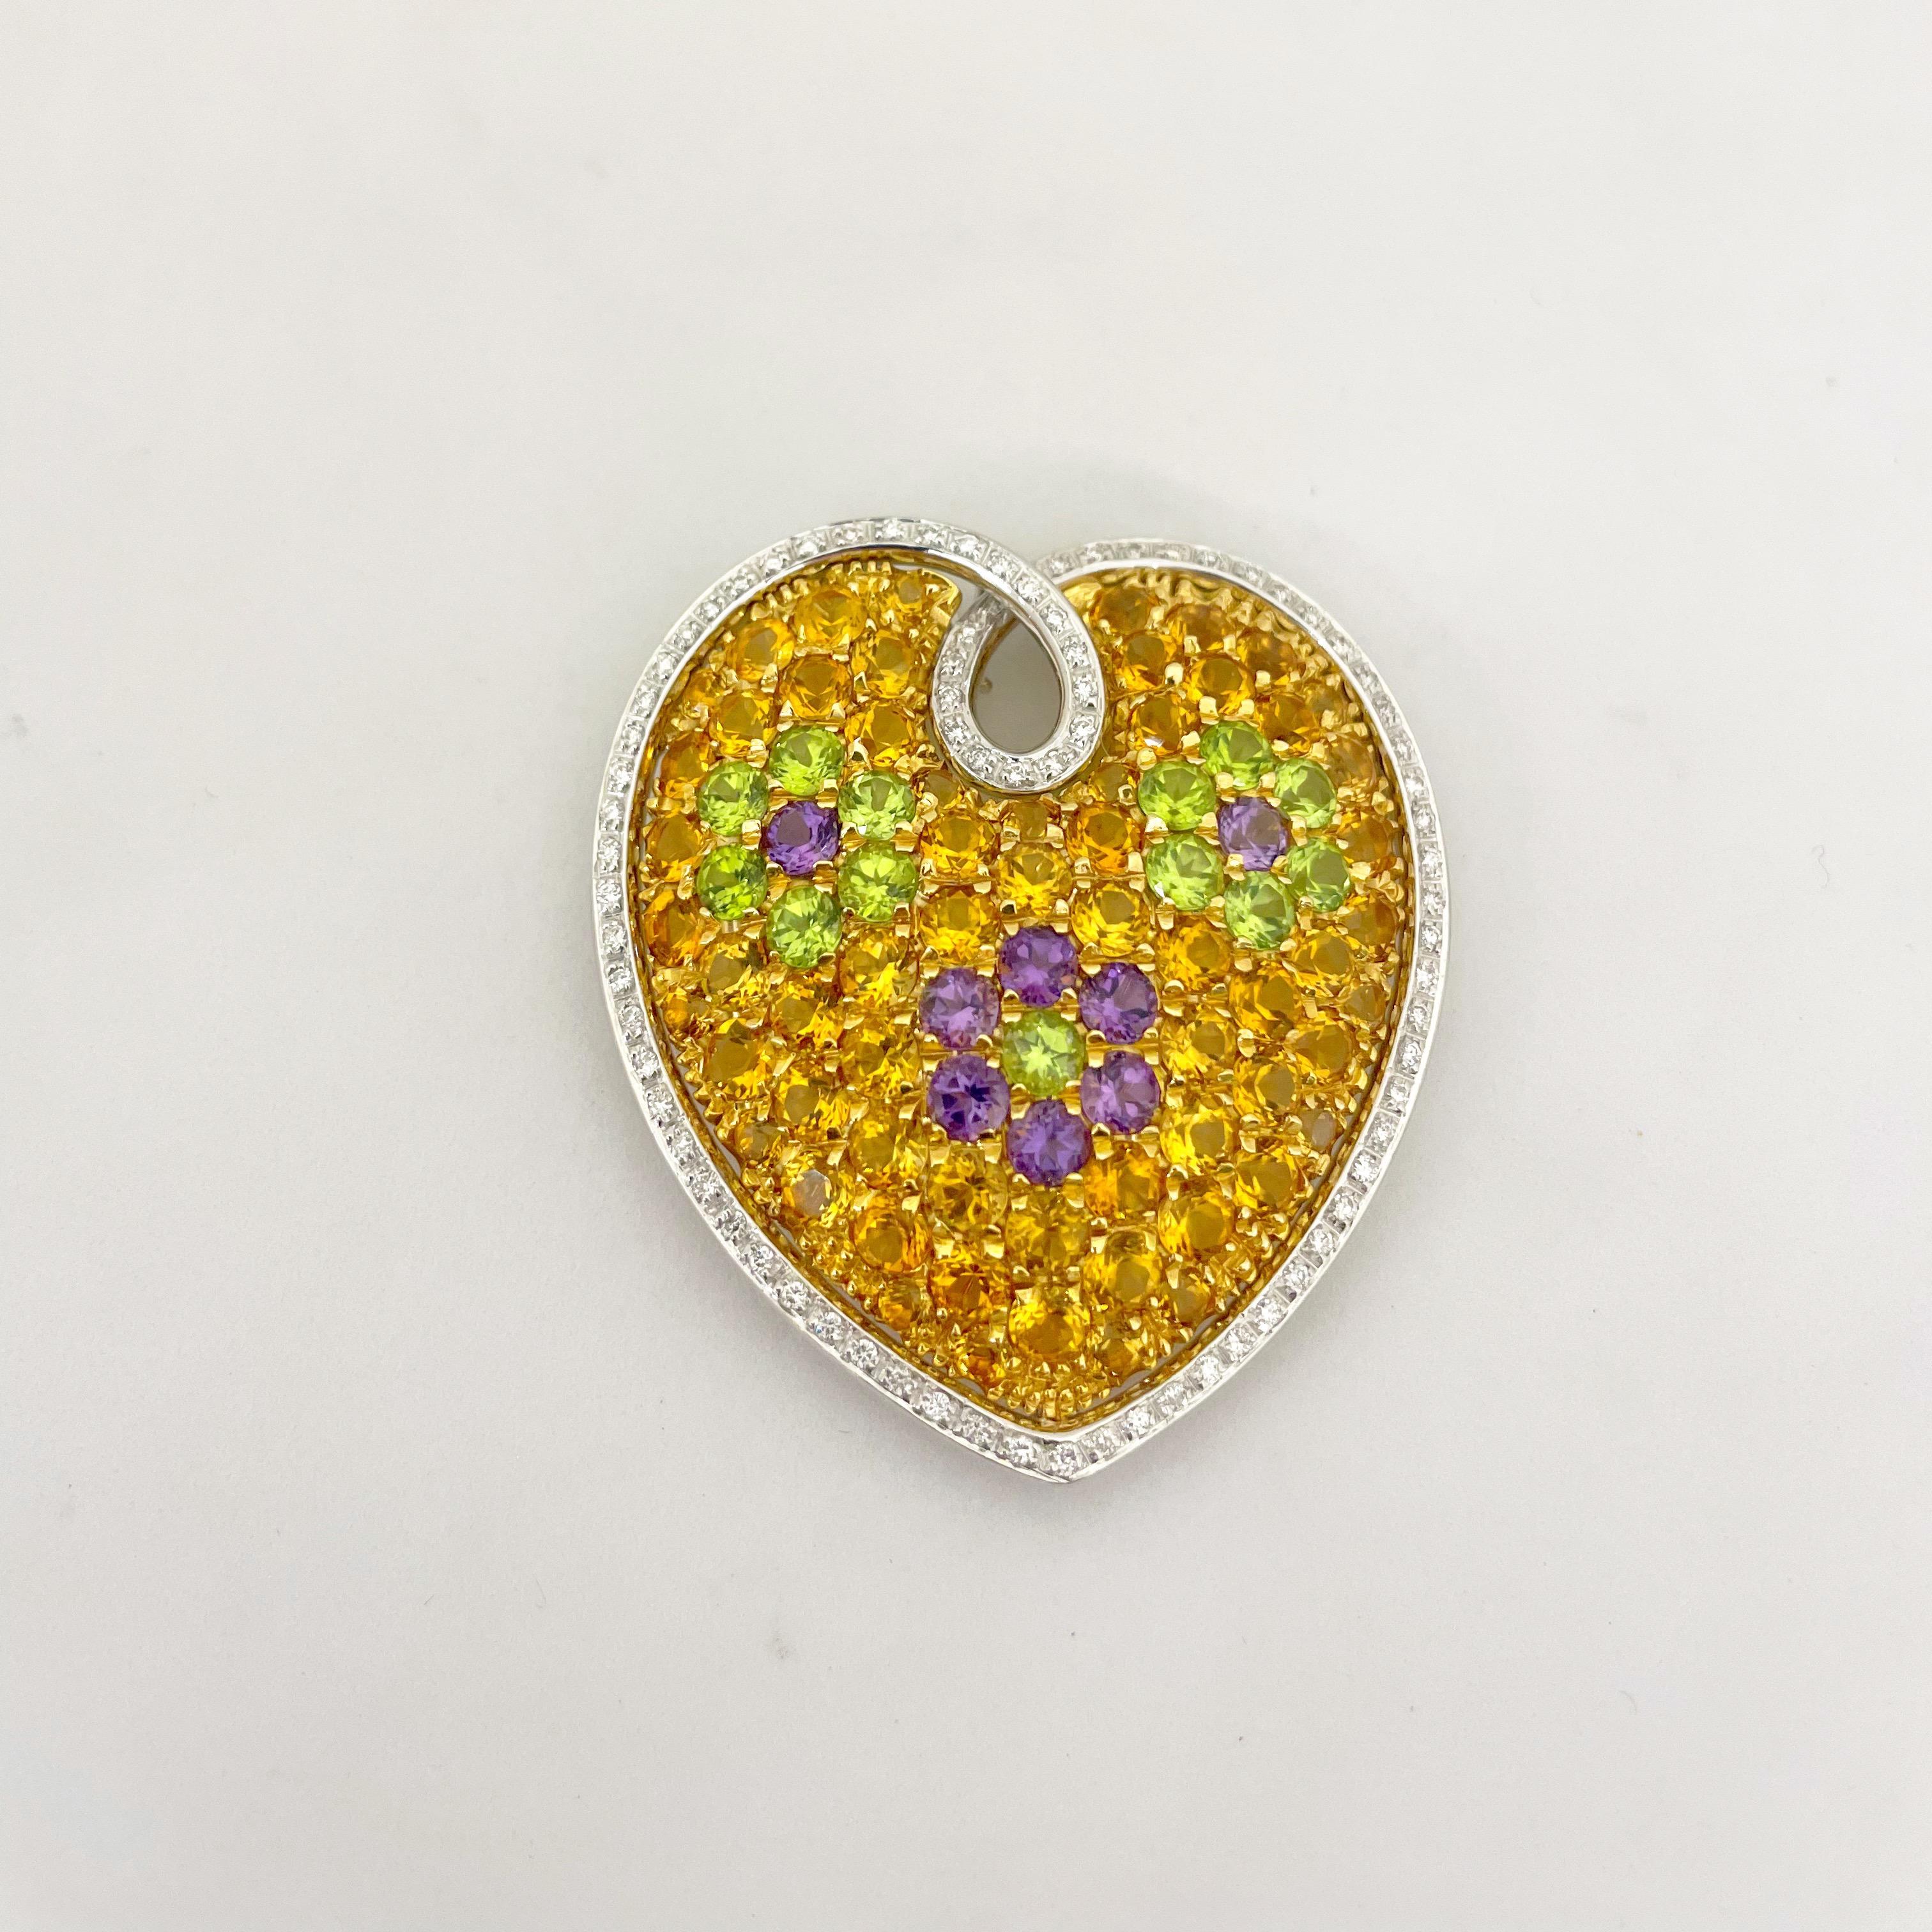 This lovely puffed heart diamond brooch by Cellini Jewelers NYC,  is made of green peridot, purple amethyst and orange citrine, a quite unique and beautiful combination of colors. The stones are set in 18kt yellow gold in a flower pattern and are